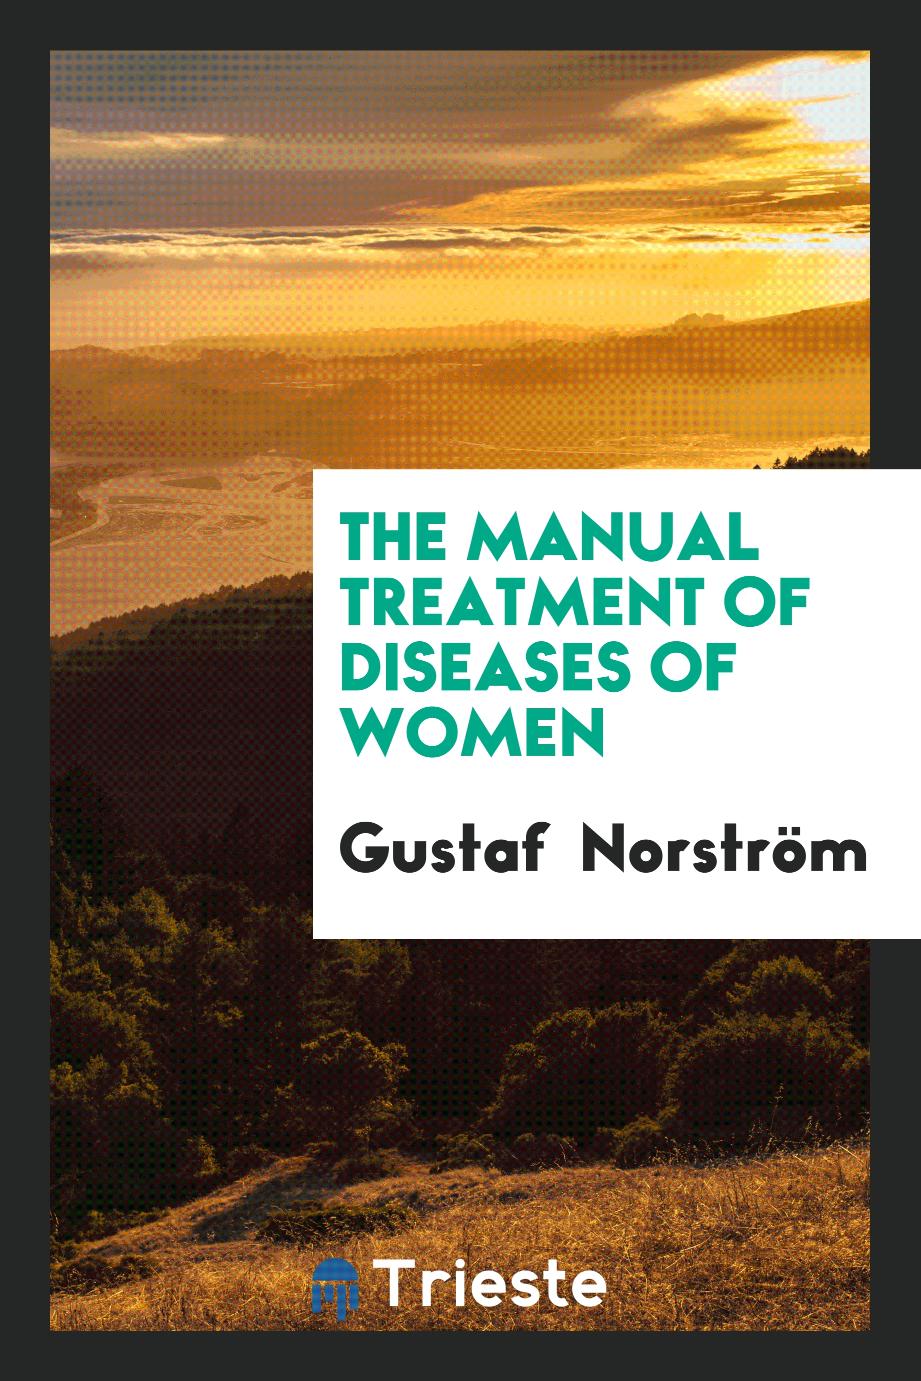 The Manual Treatment of Diseases of Women